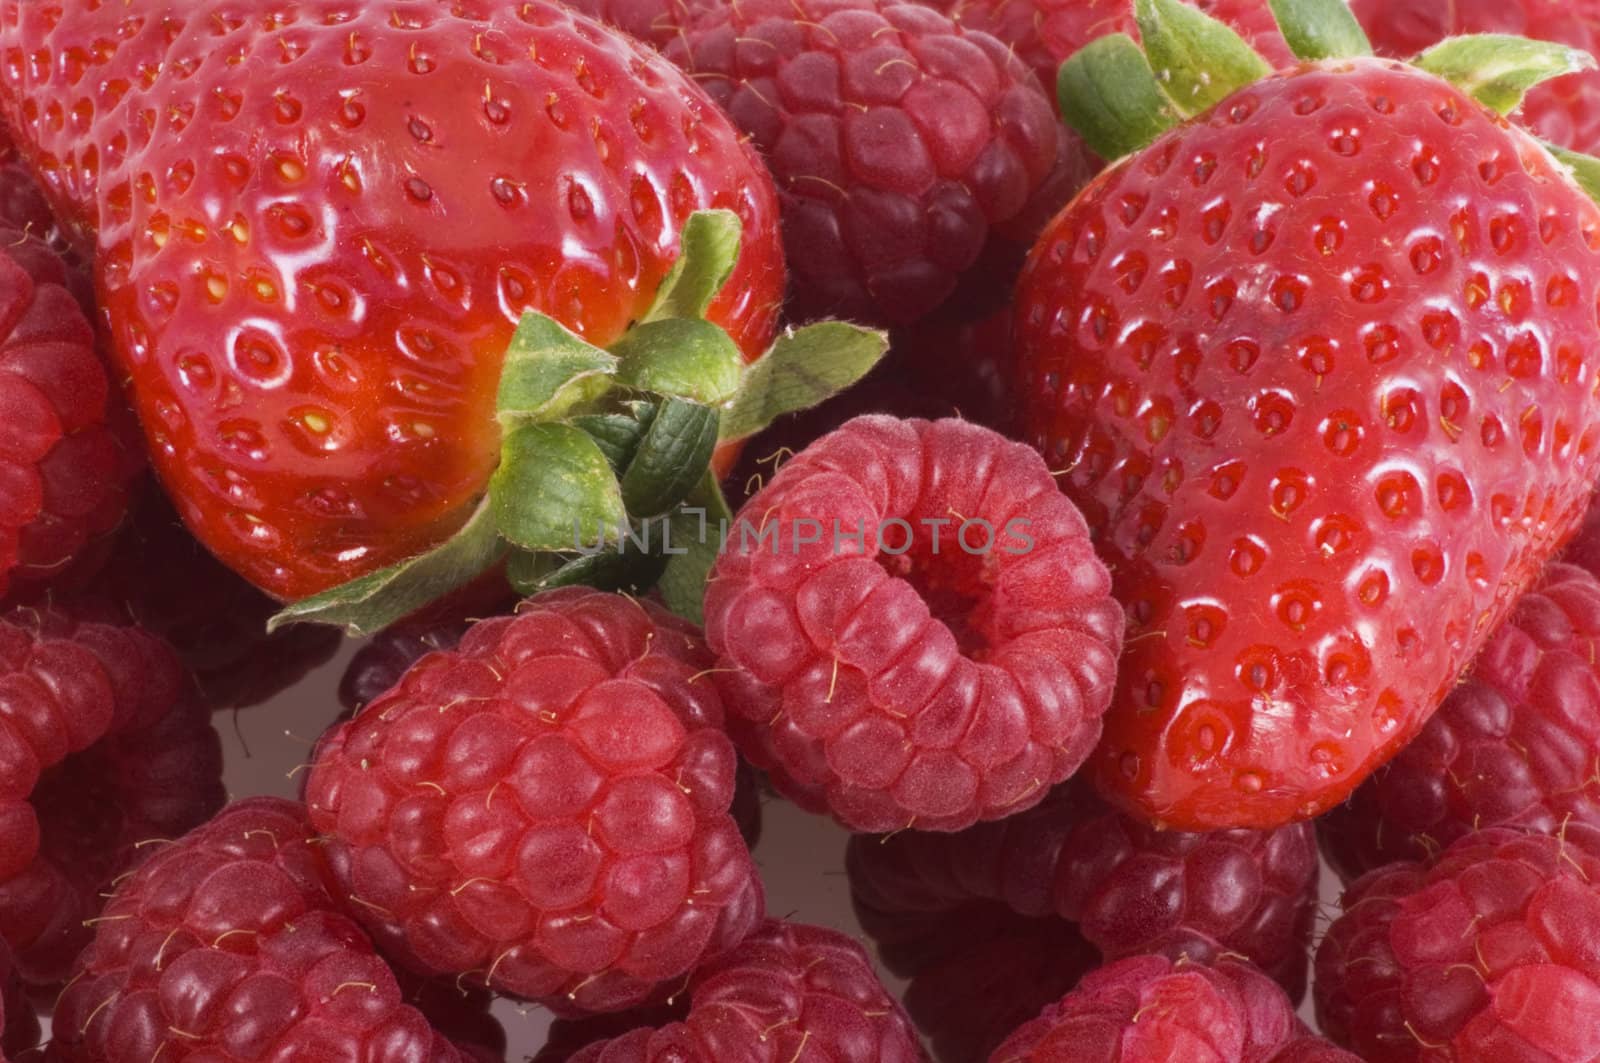 Close up of a bunch of raspberries and strawberries.